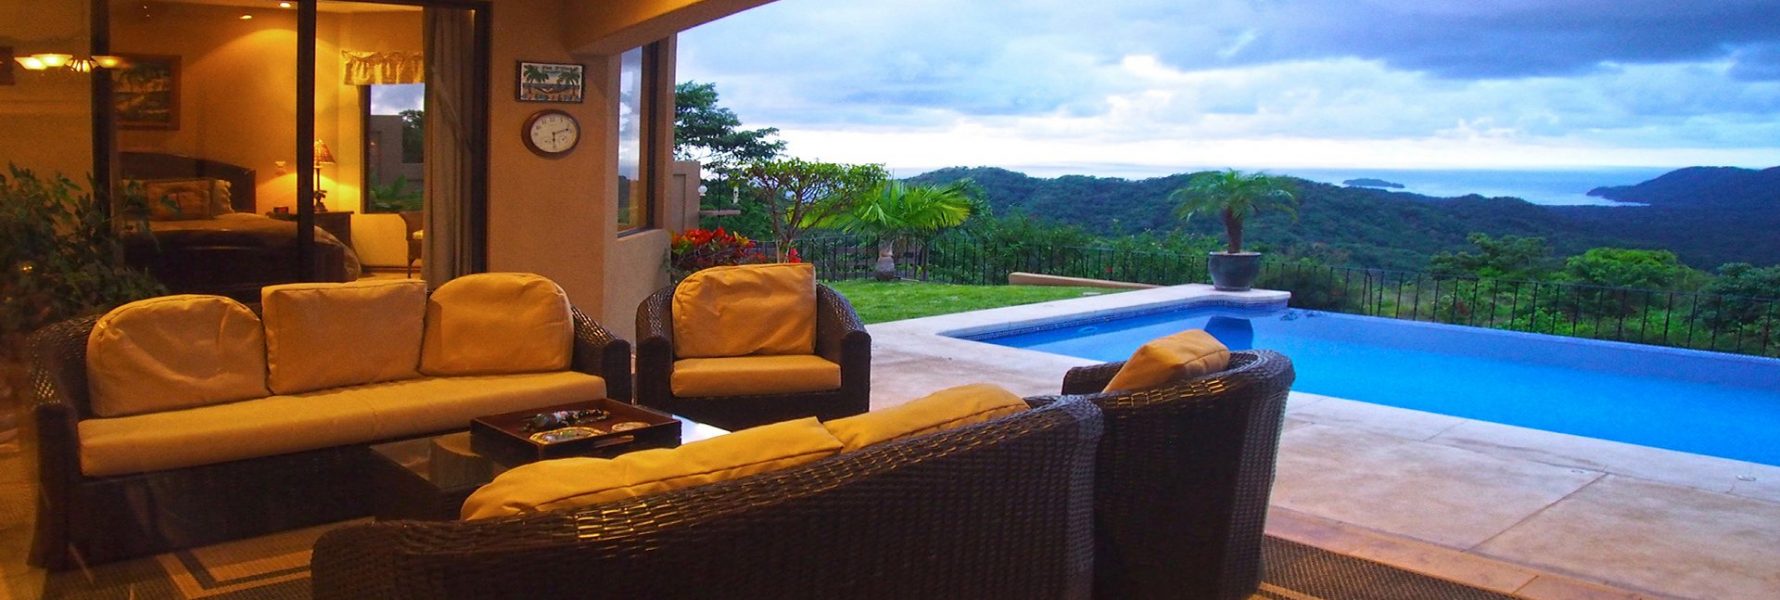 Sit & relax in this nice size room while overlooking the views from atop this hill